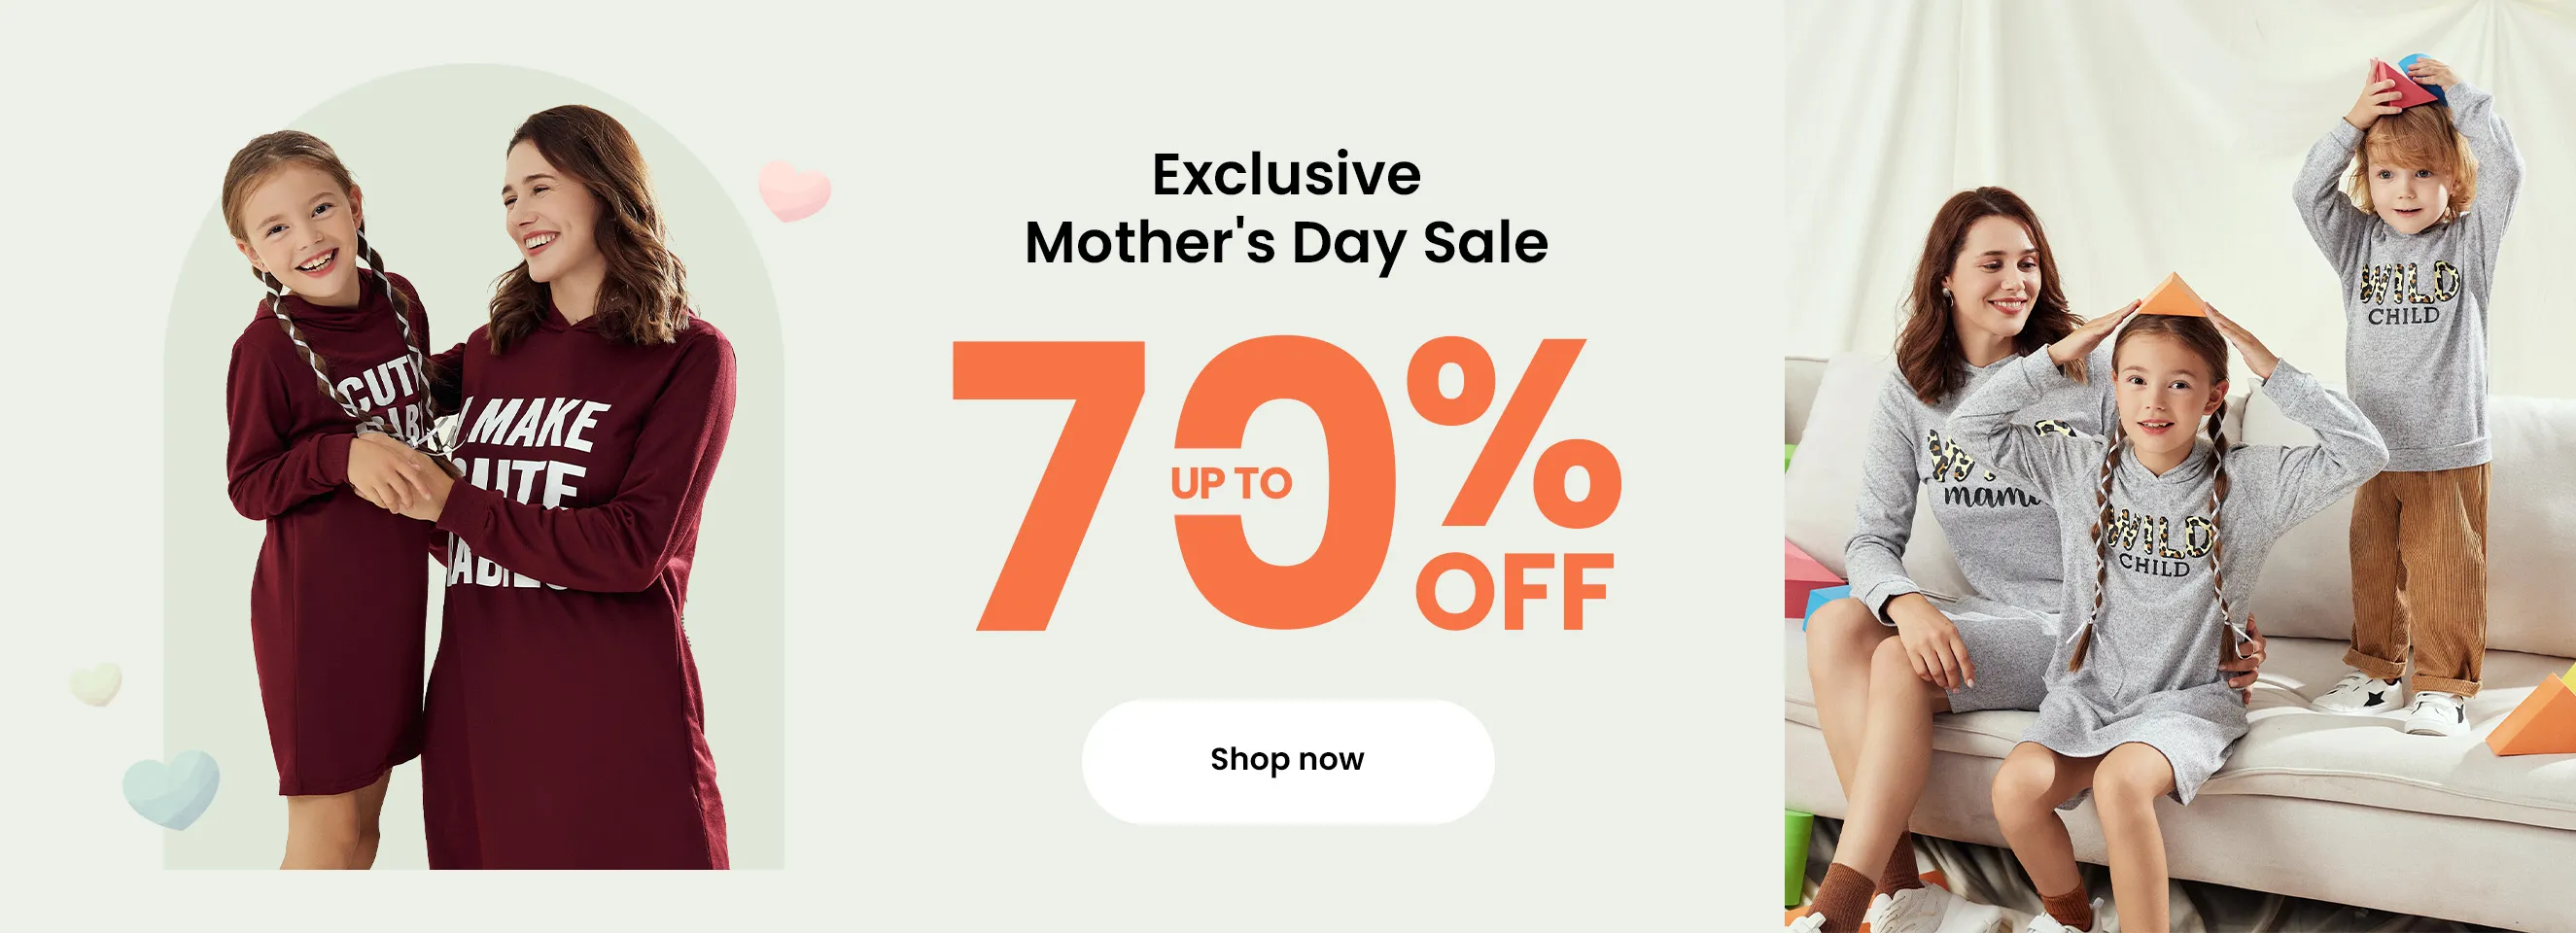 Click it to join Exclusive Mother's Day Sale activity